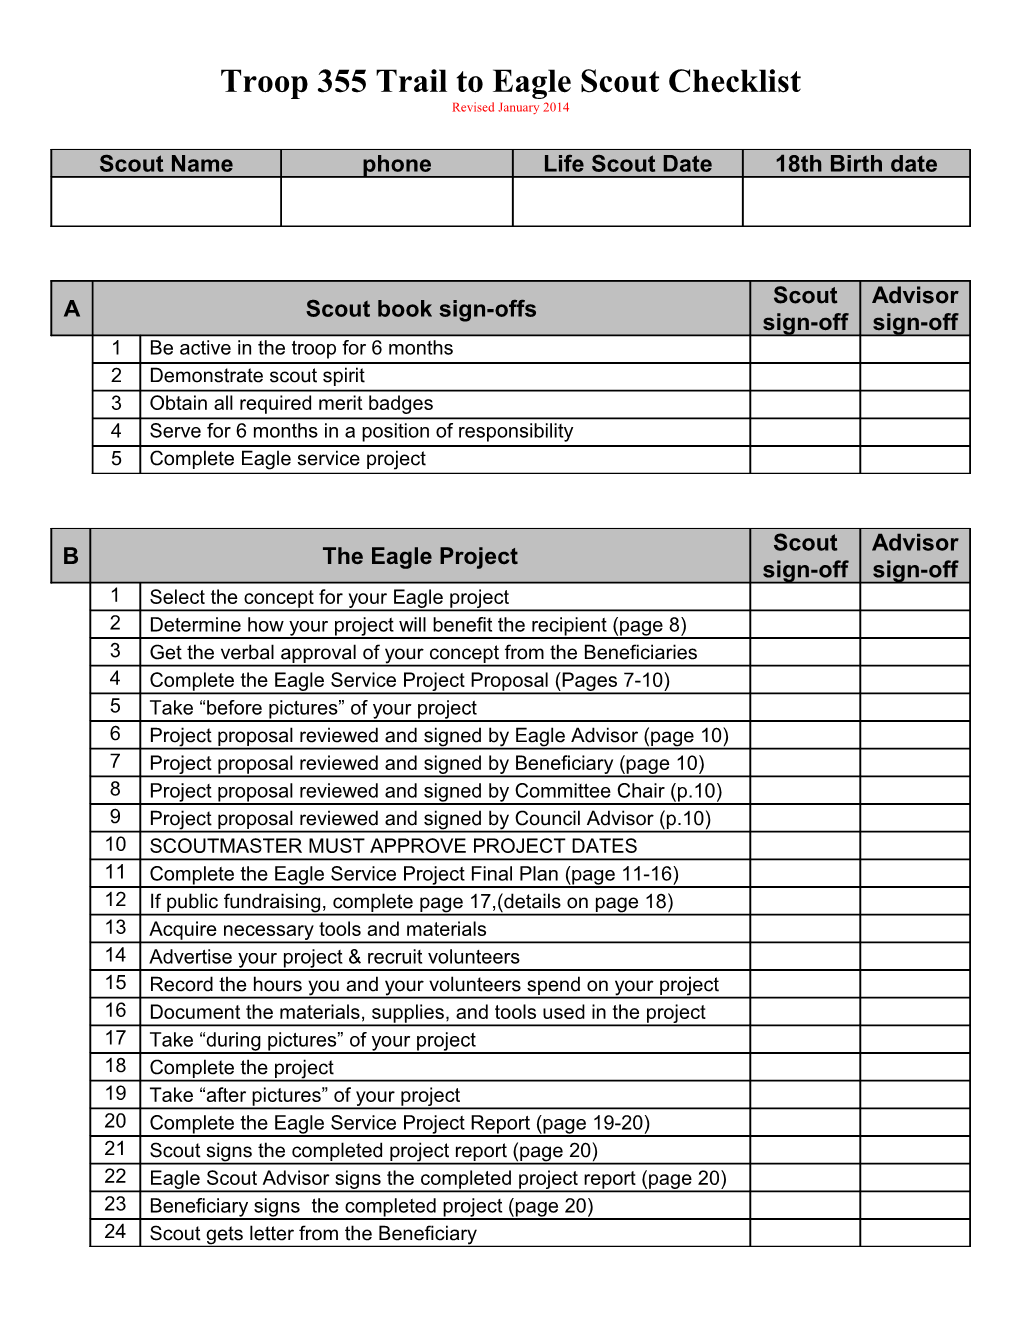 Troop 355Trail to Eagle Scout Checklist